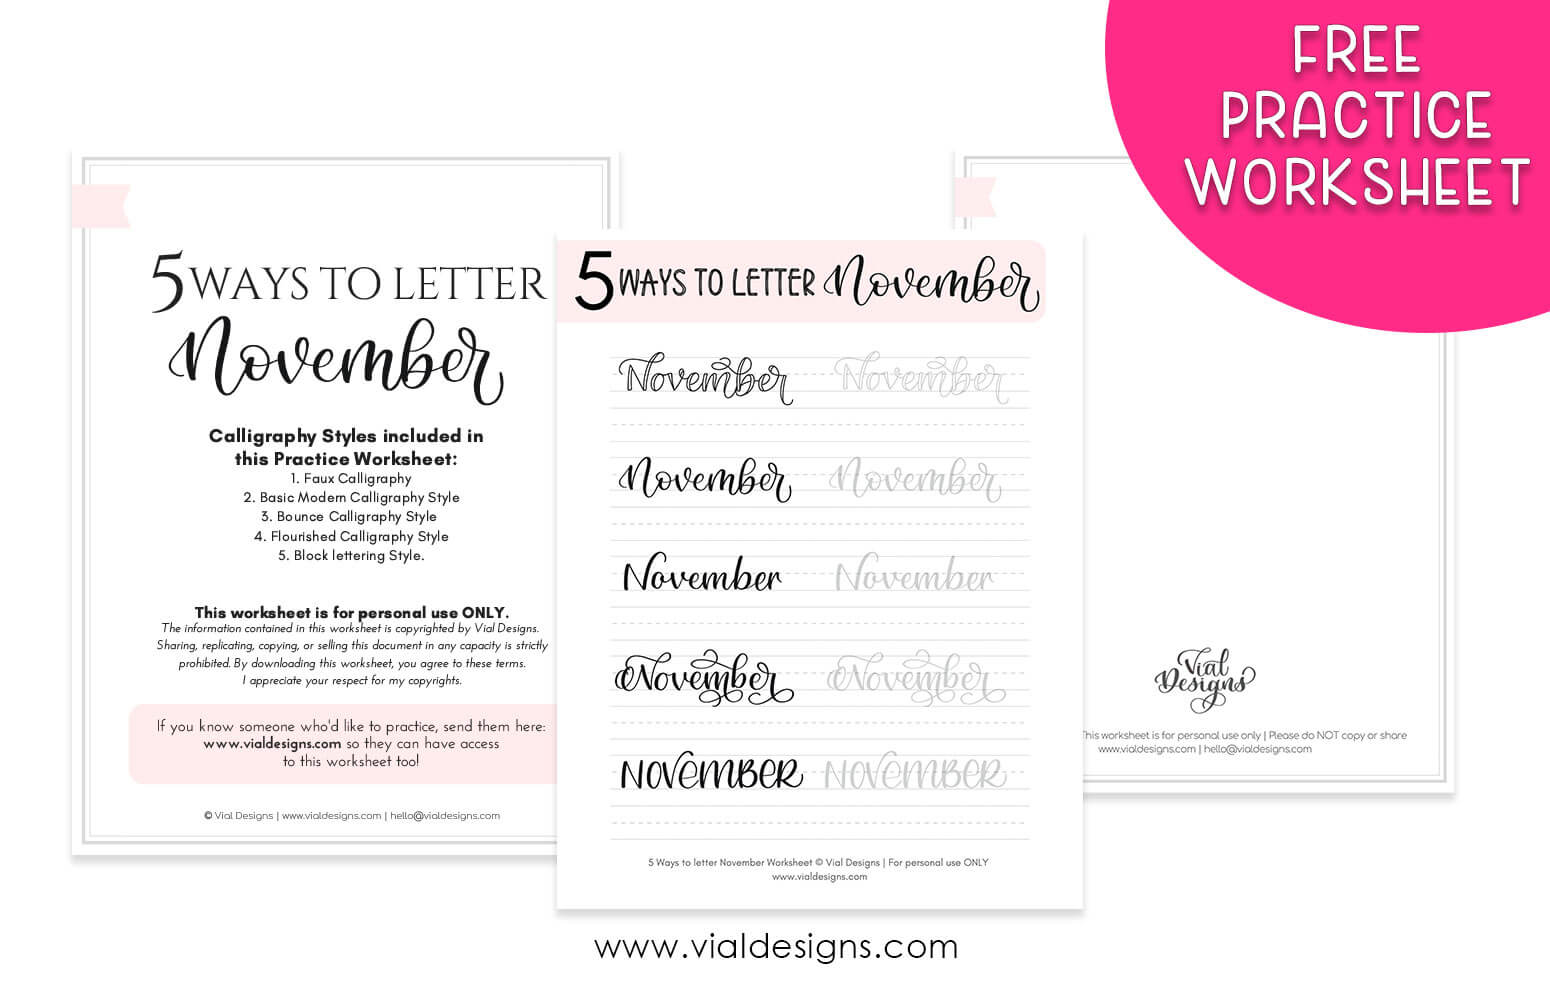 three page display of the free lettering worksheet 5 ways to letter November by Vial Designs